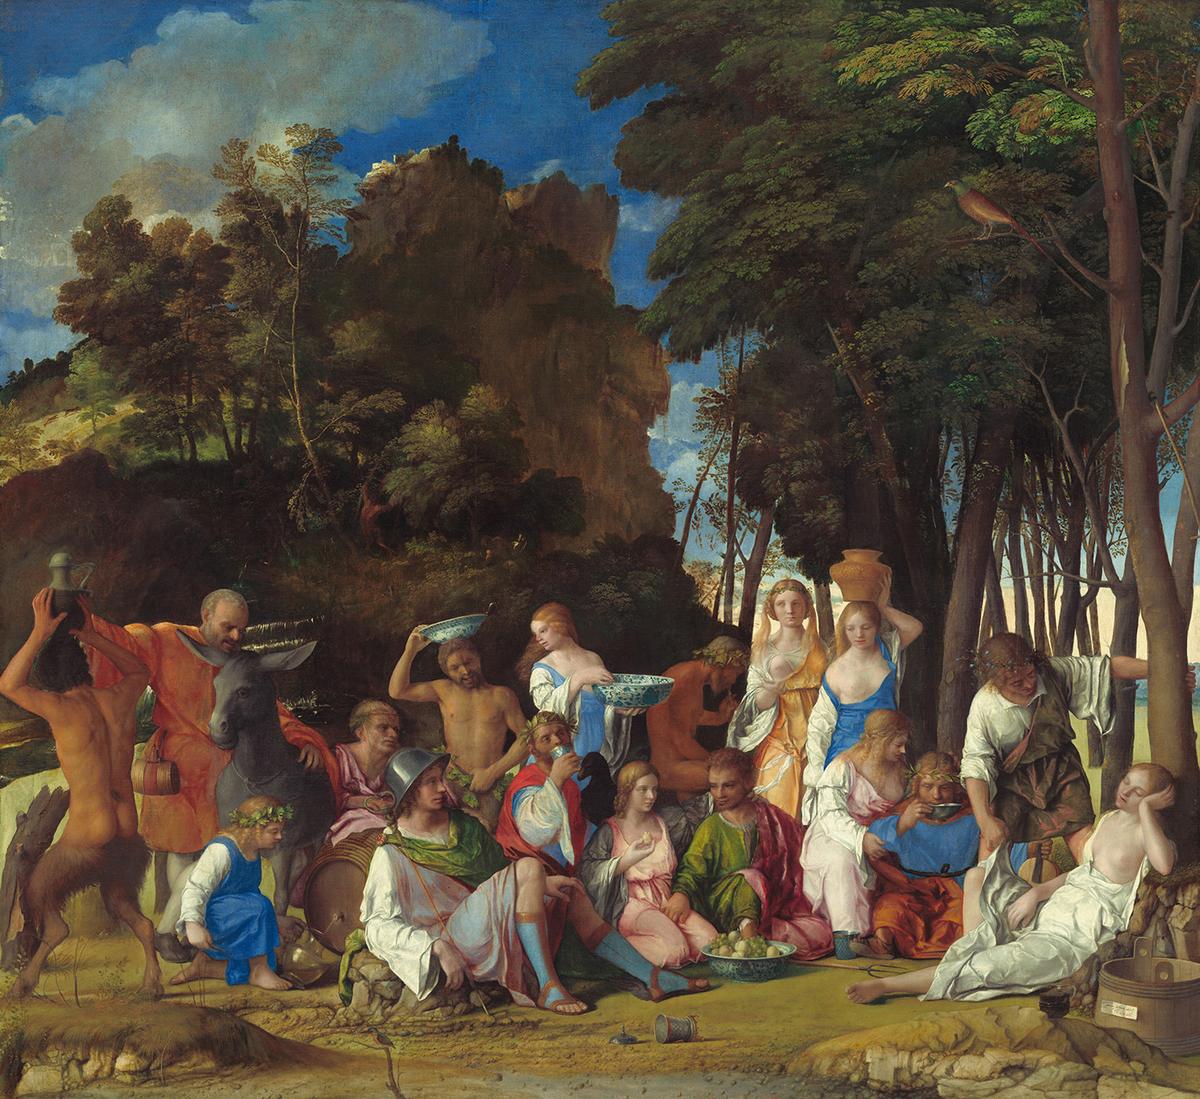 "The Feast of the Gods," 1514 and 1529, by Giovanni Bellini and Titian. Oil on canvas. National Gallery of Art, Washington, D.C. (Public Domain)